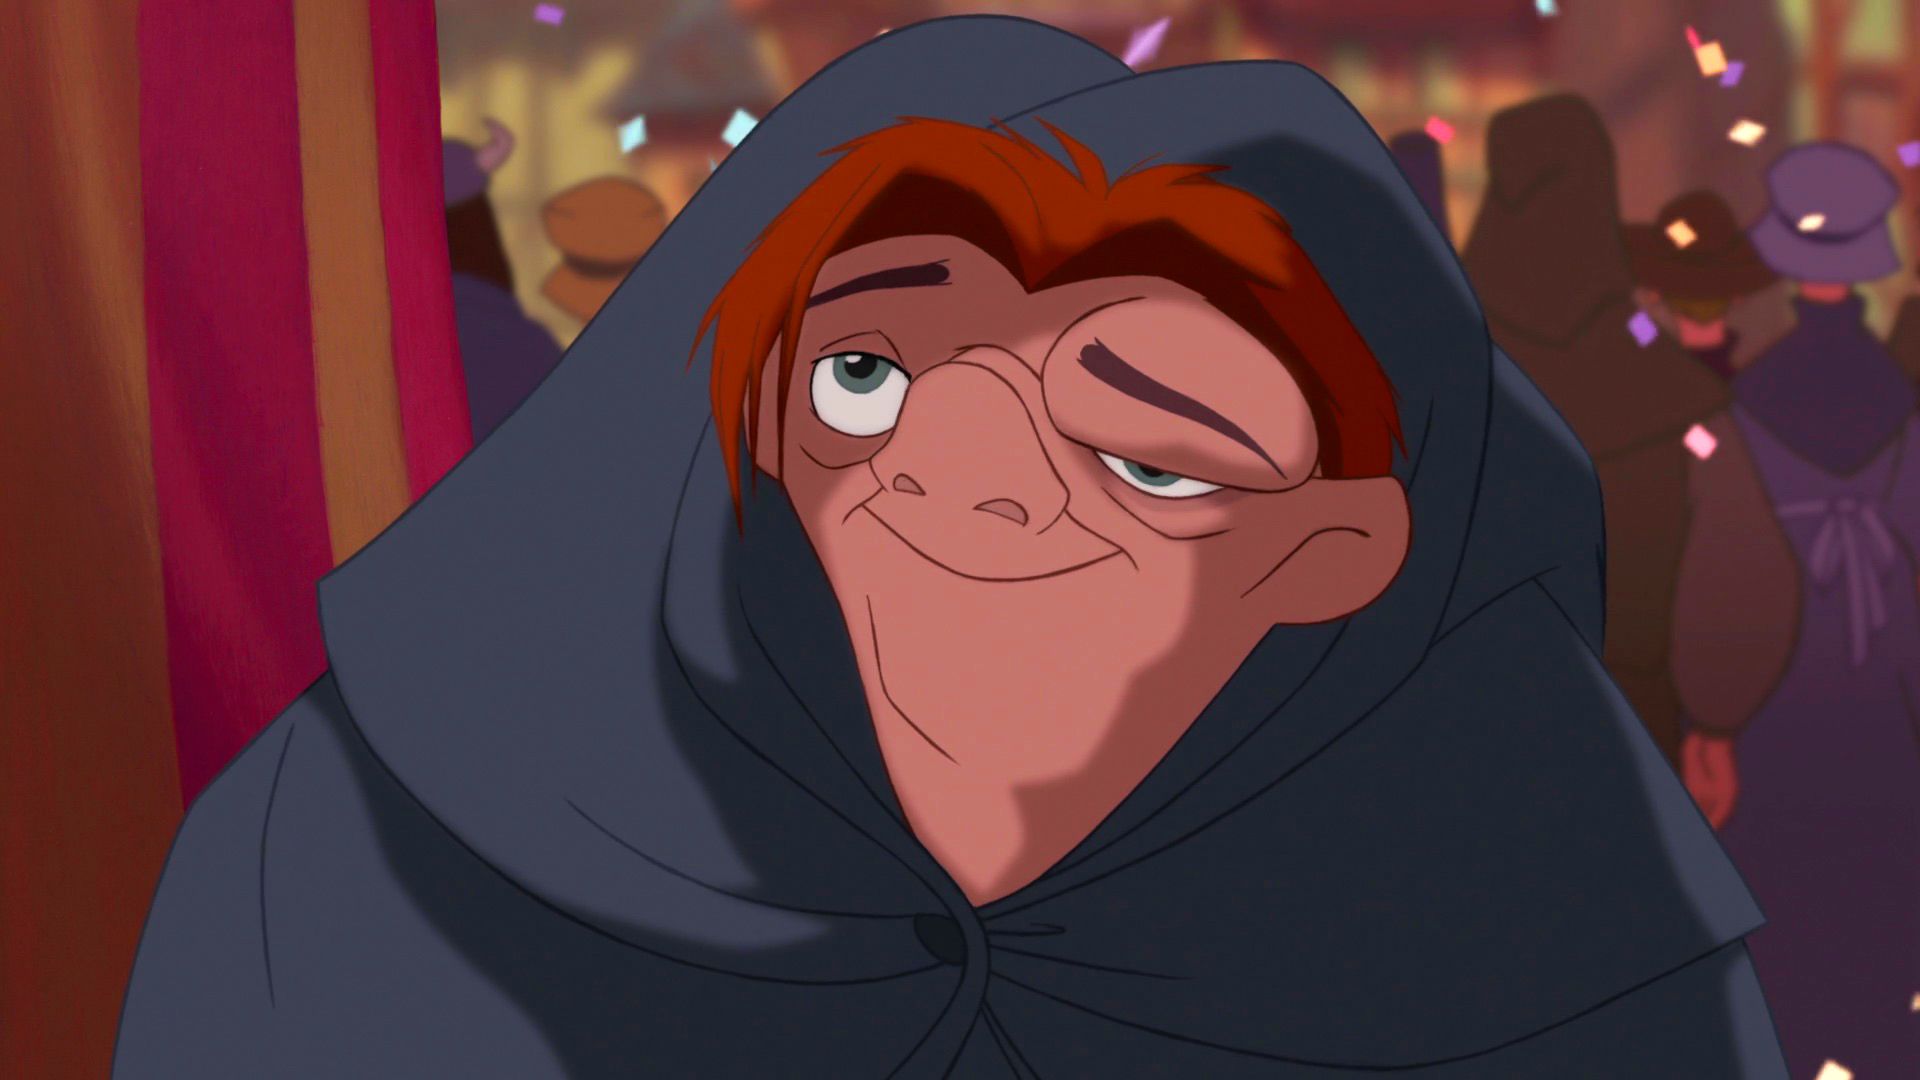 The Hunchback of Notre Dame background